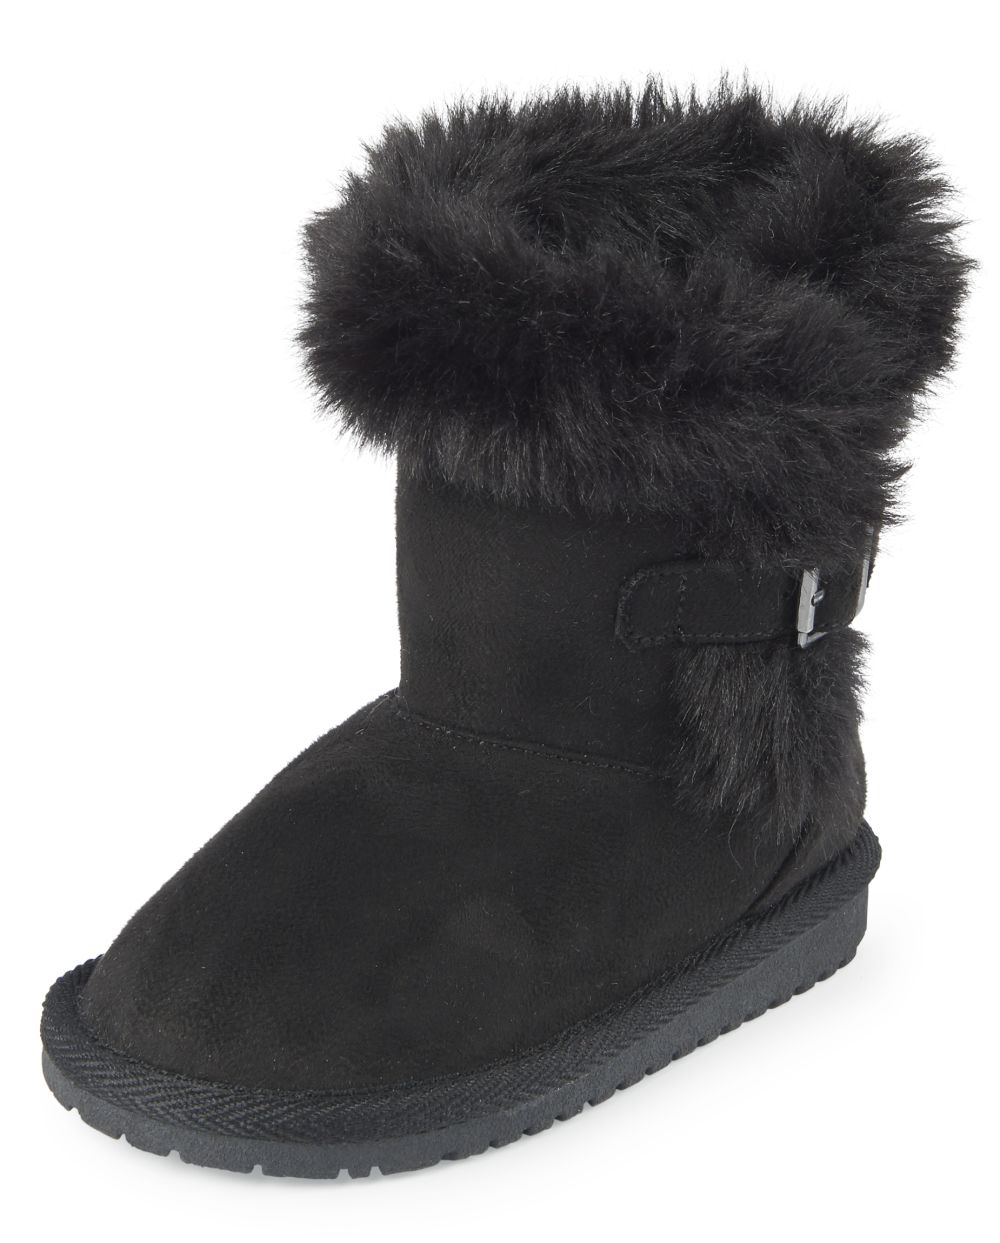 Toddler Girls Buckle Faux Fur Boots